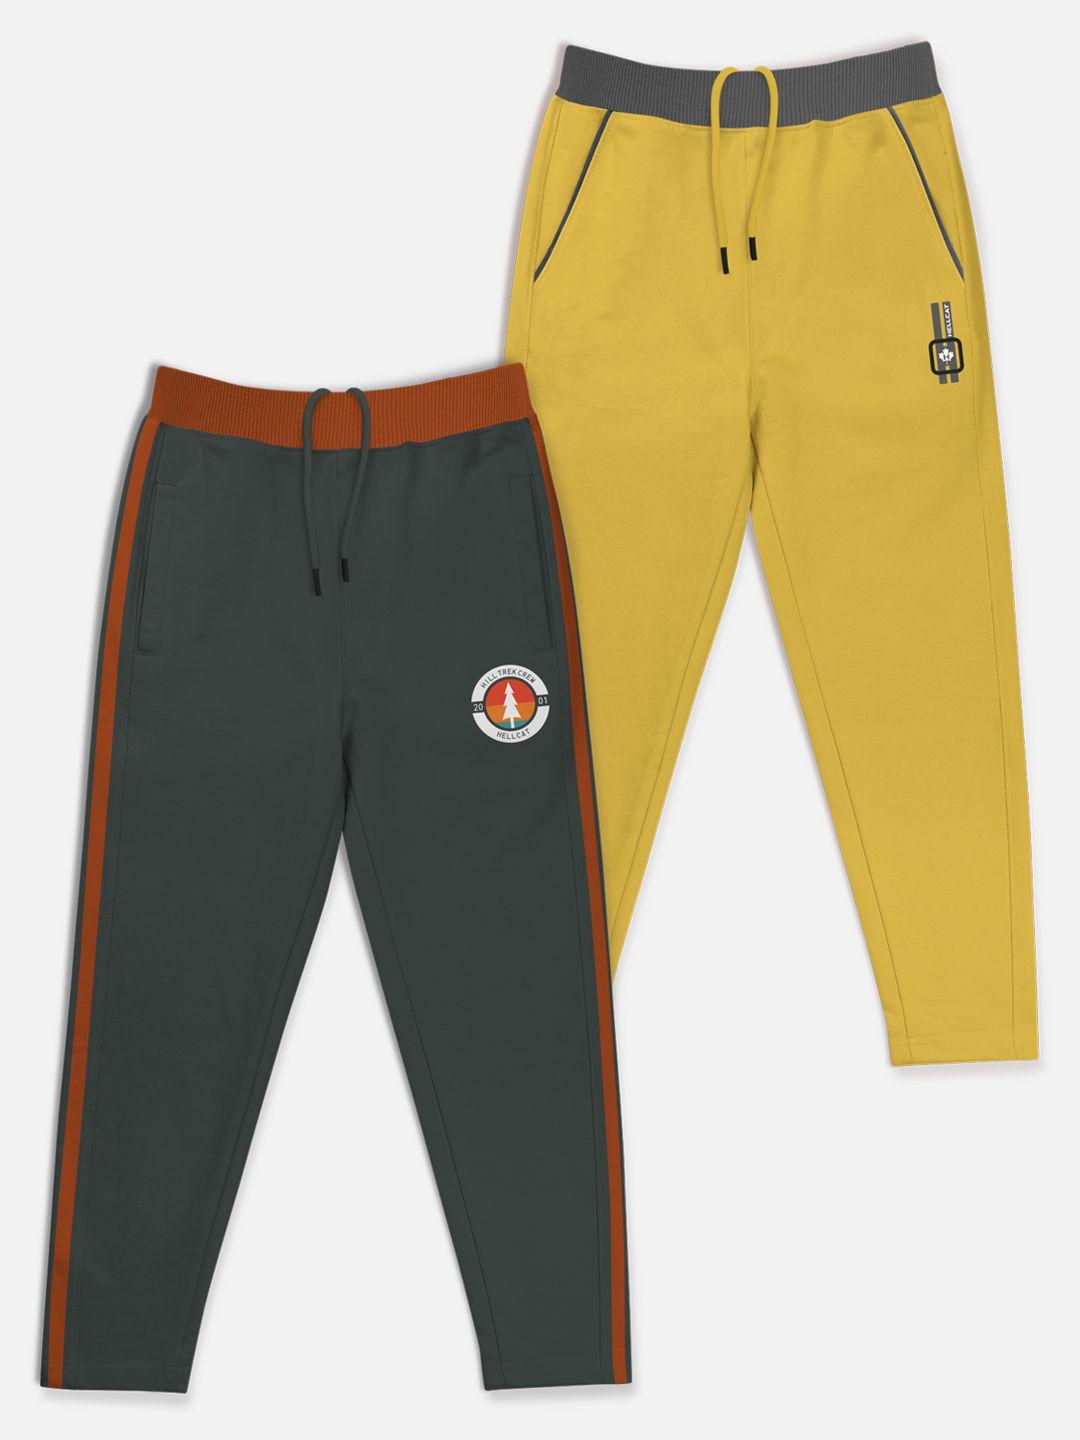 hellcat boys pack of 2 cotton track pants